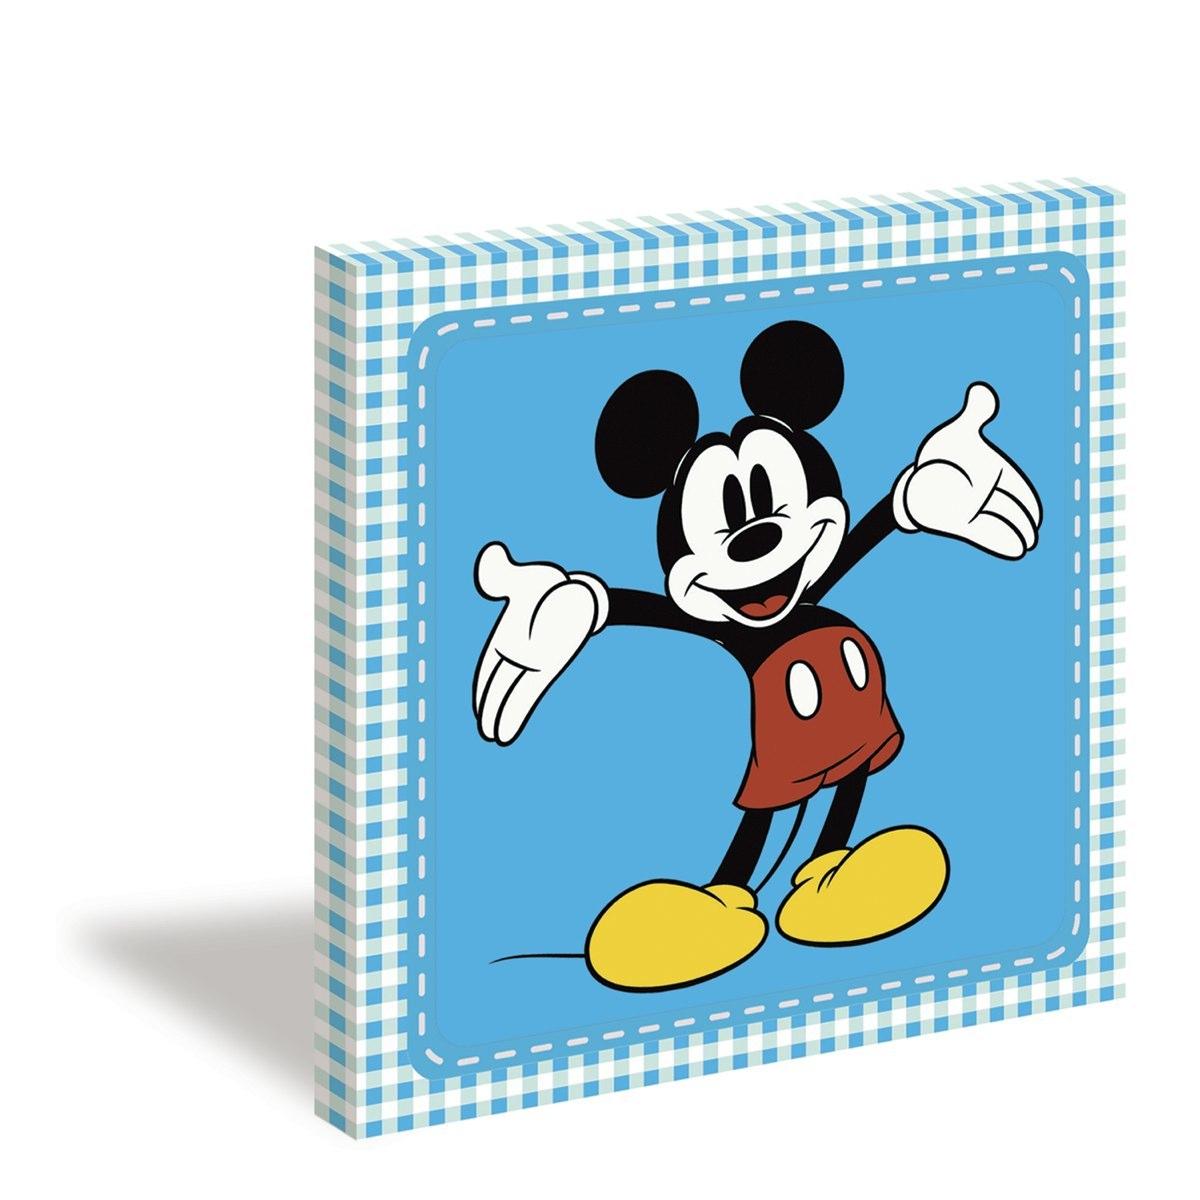   Classic Mickey Mouse Gallery wrapped Canvas Art  